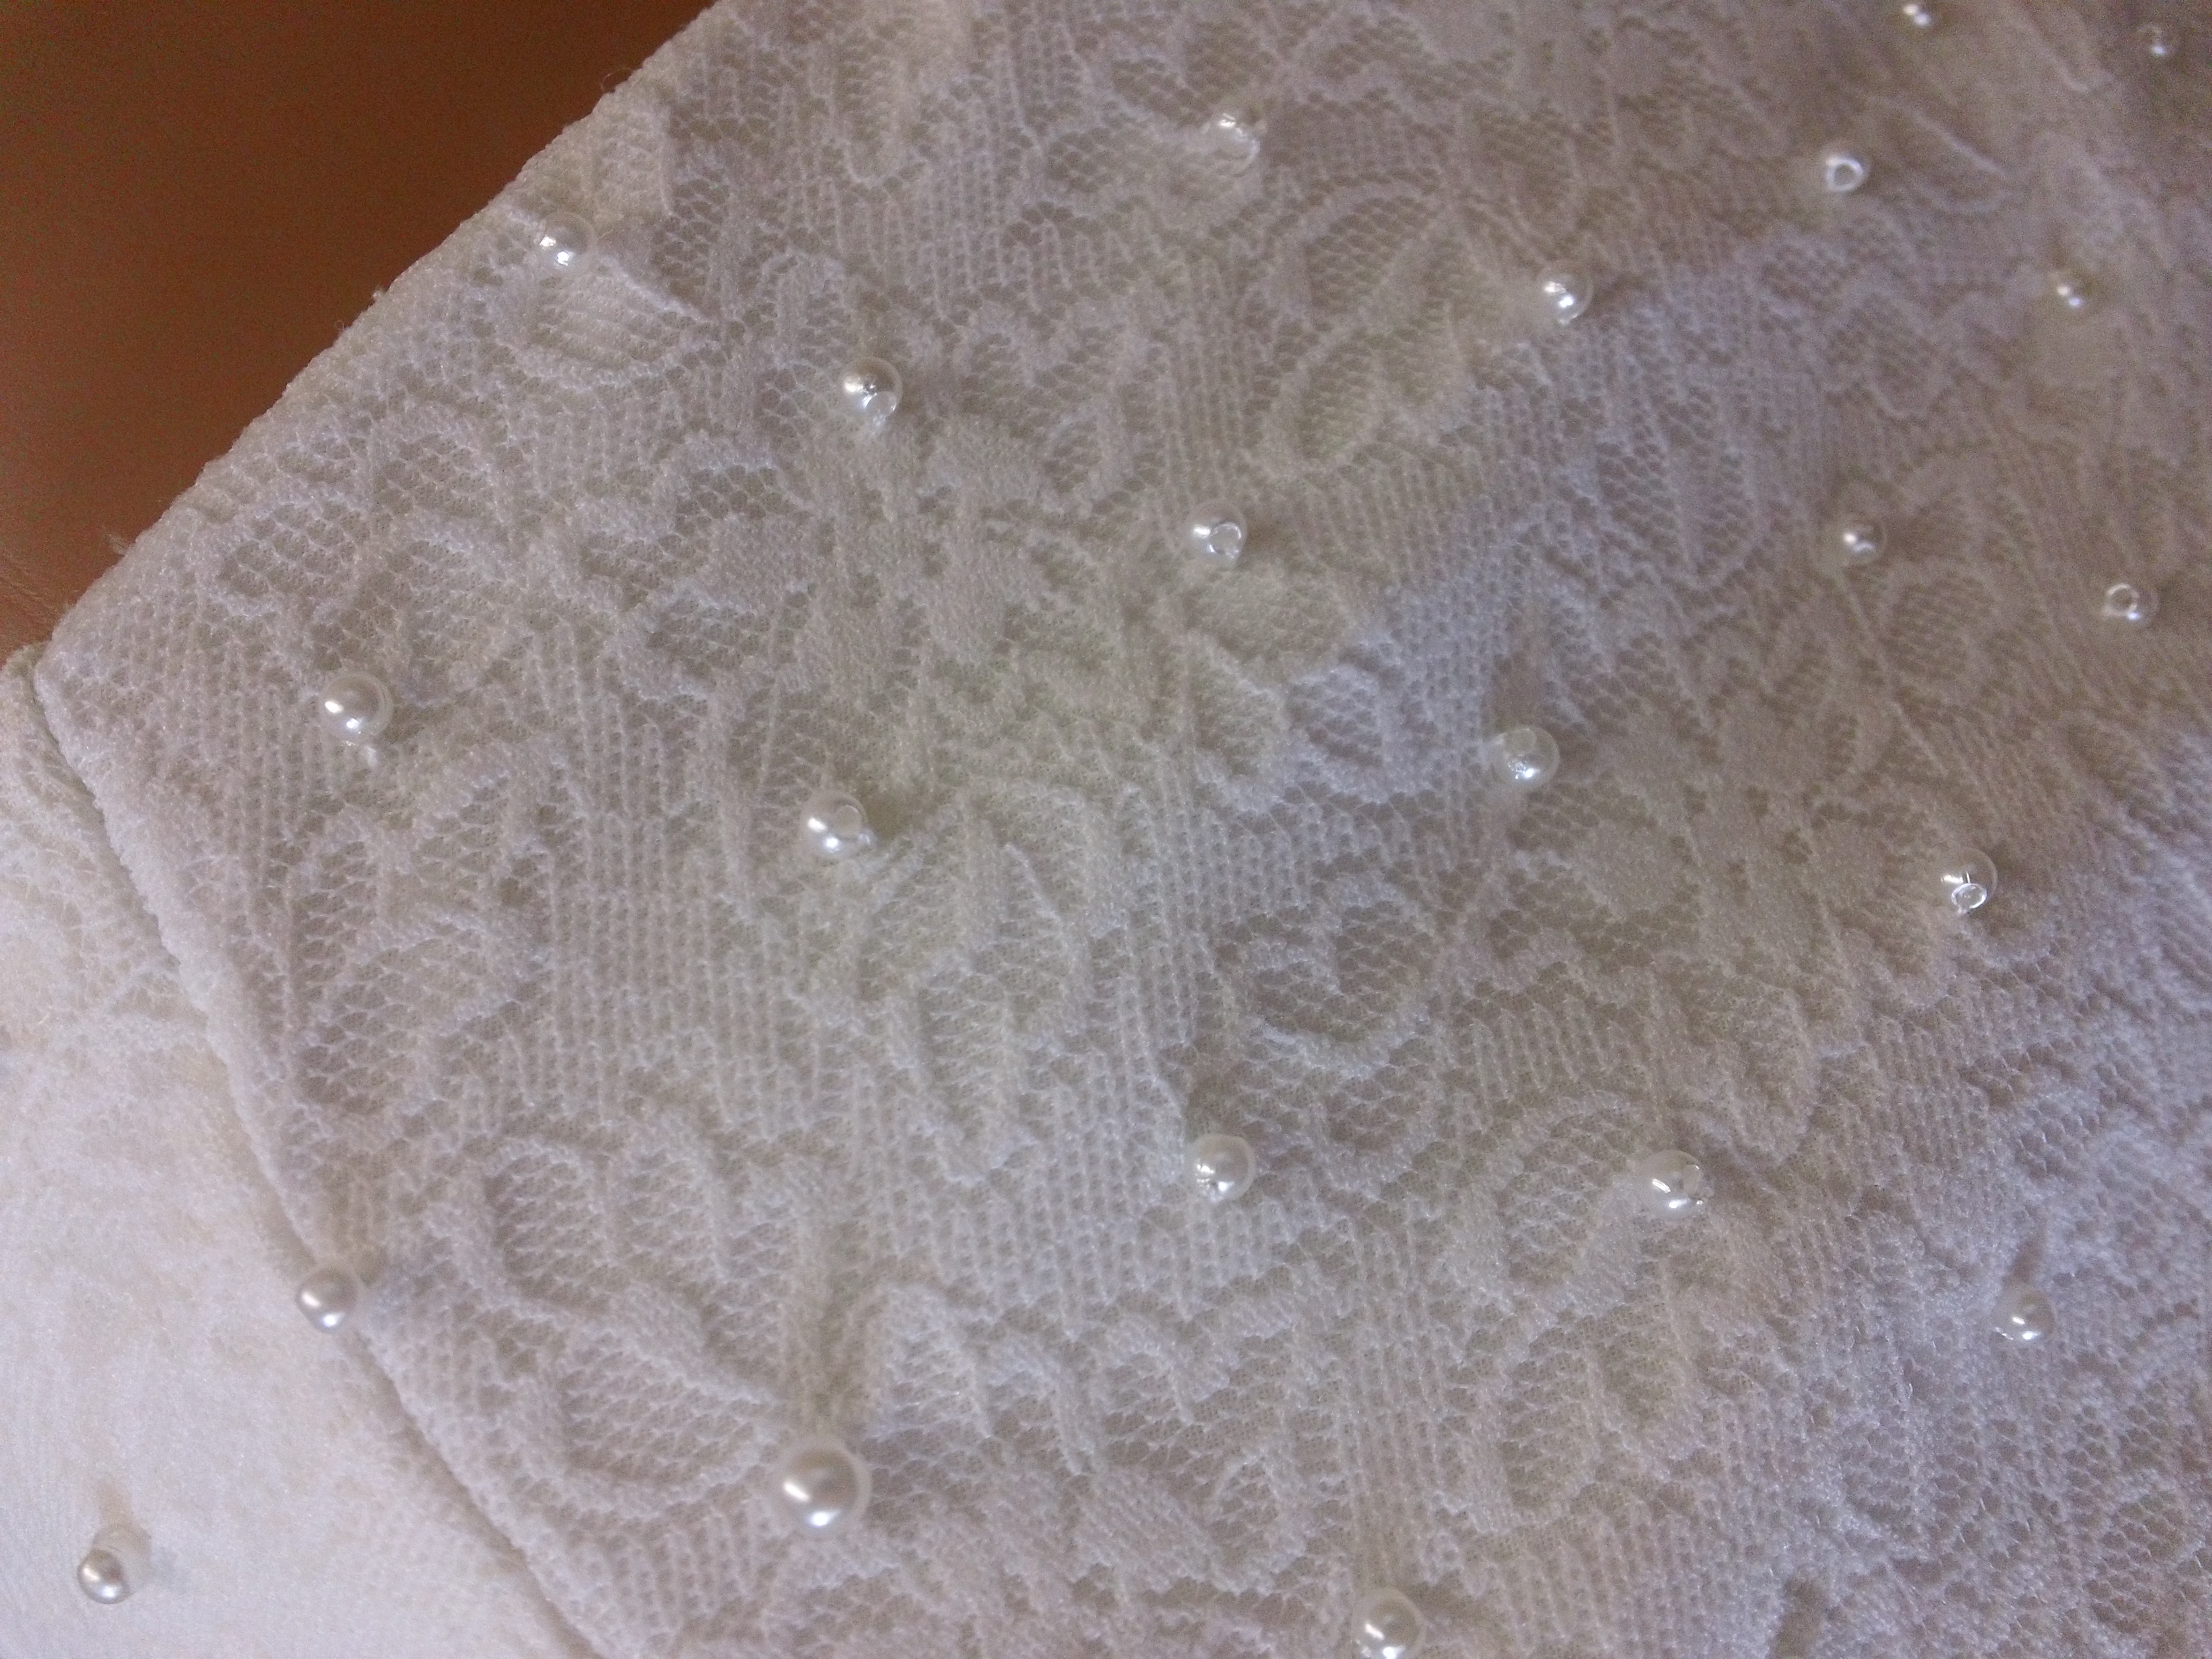 lace bodice is accented with faux pearls